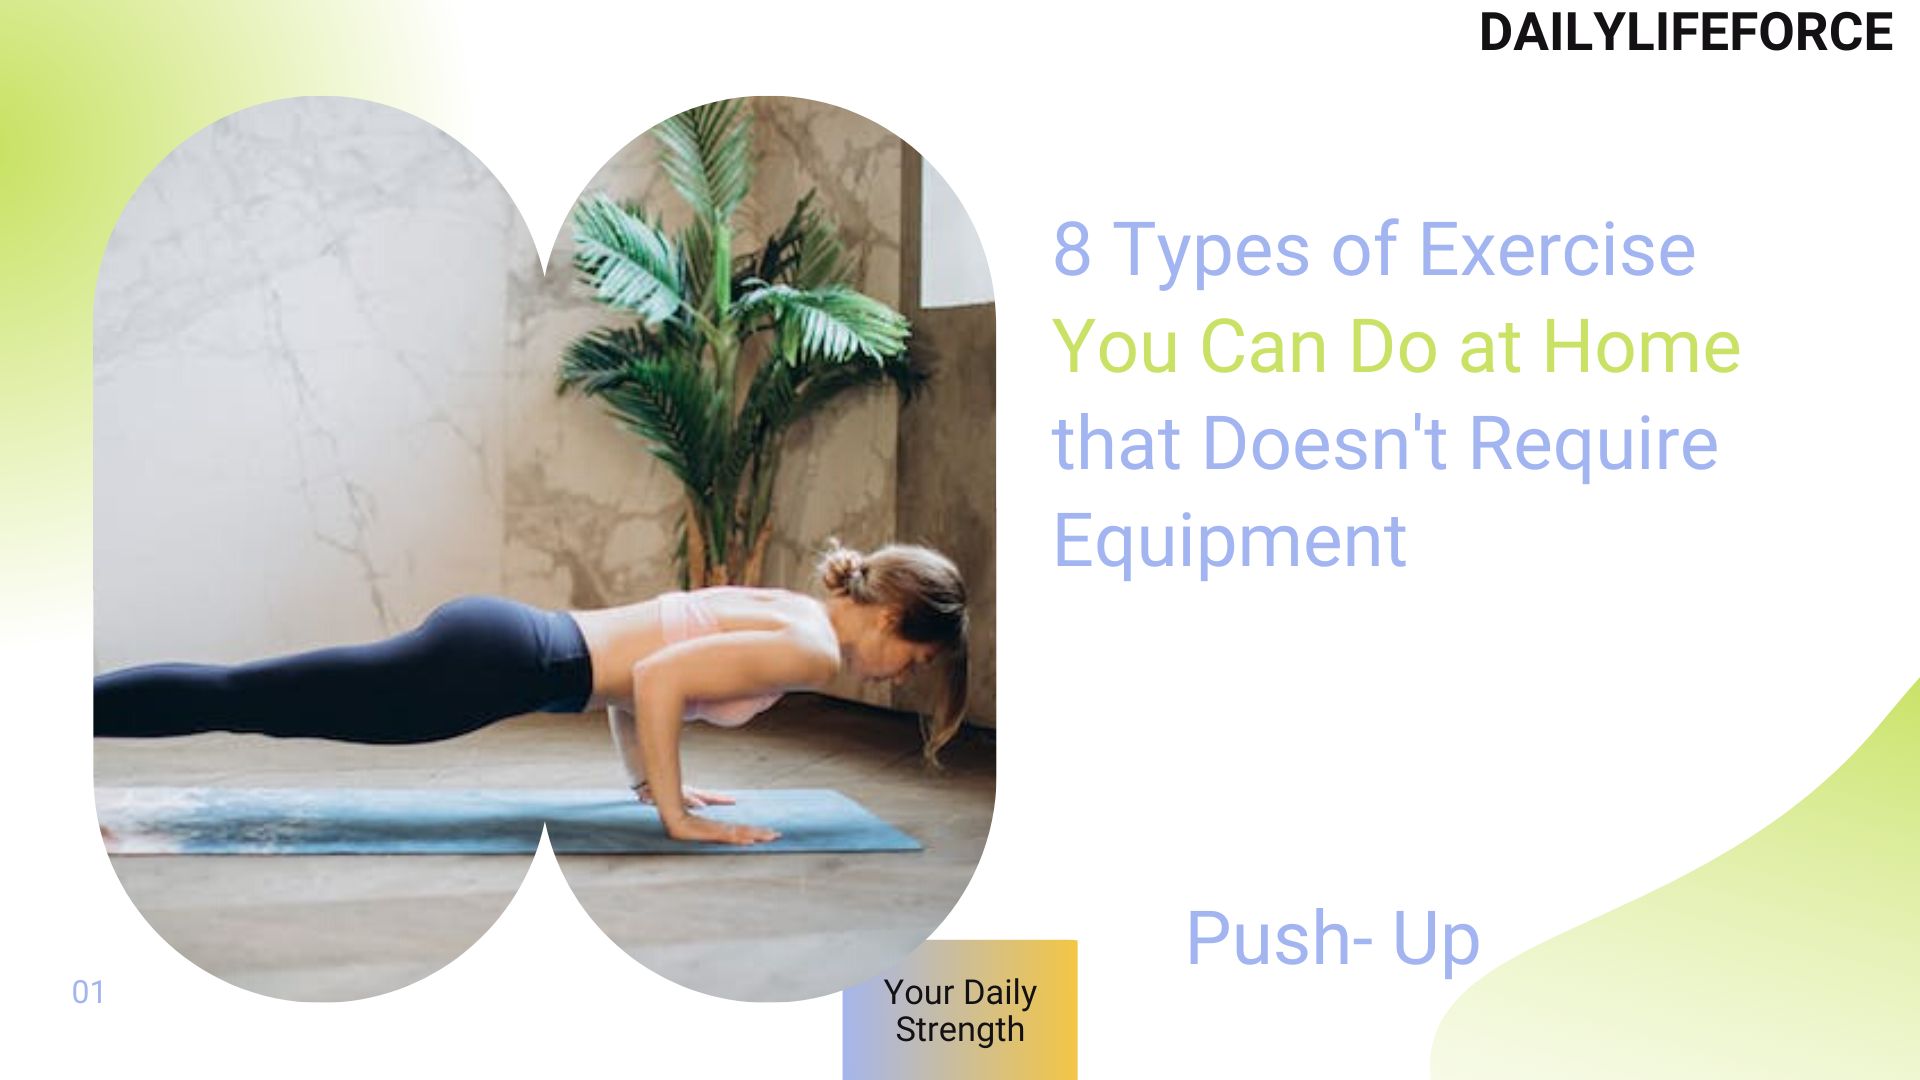 8 Types of Exercise You Can Do at Home that Doesn't Require Equipment